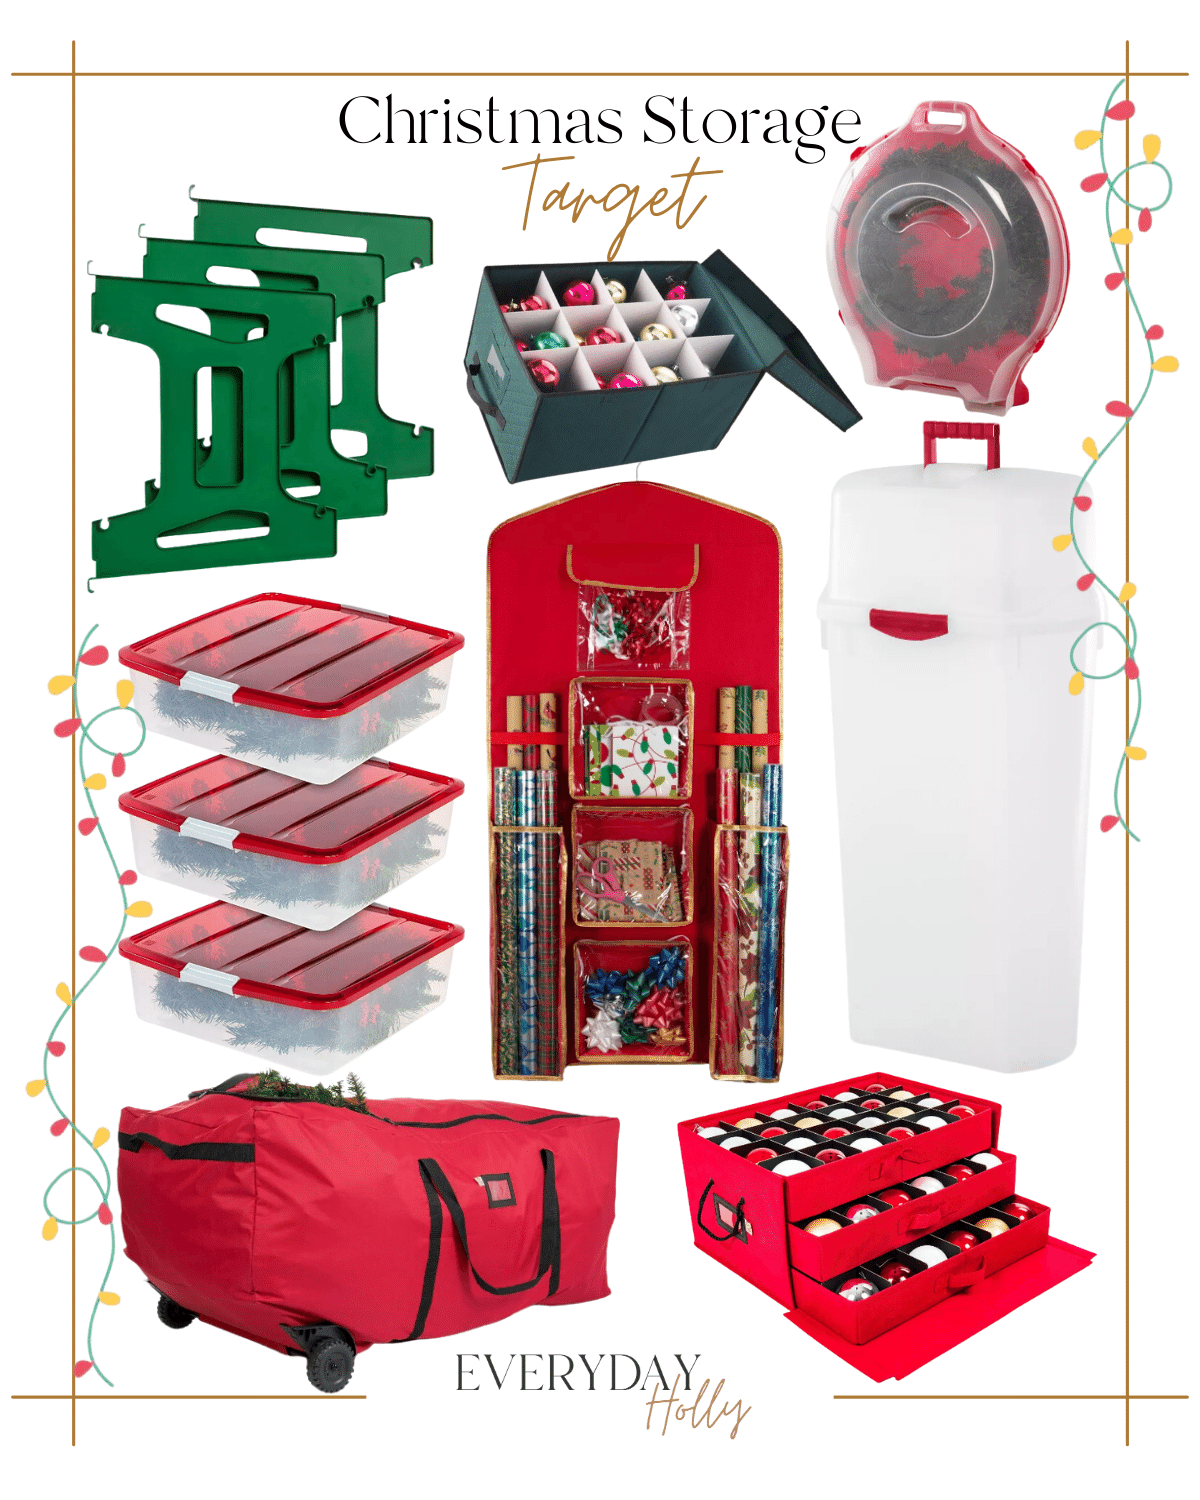 wrap up christmas quality storage and organization | #wrapup #christmas #storage #organization #holidays #target #lights #wrappingpapper #christmaslights #christmaswreath #organize #clear 